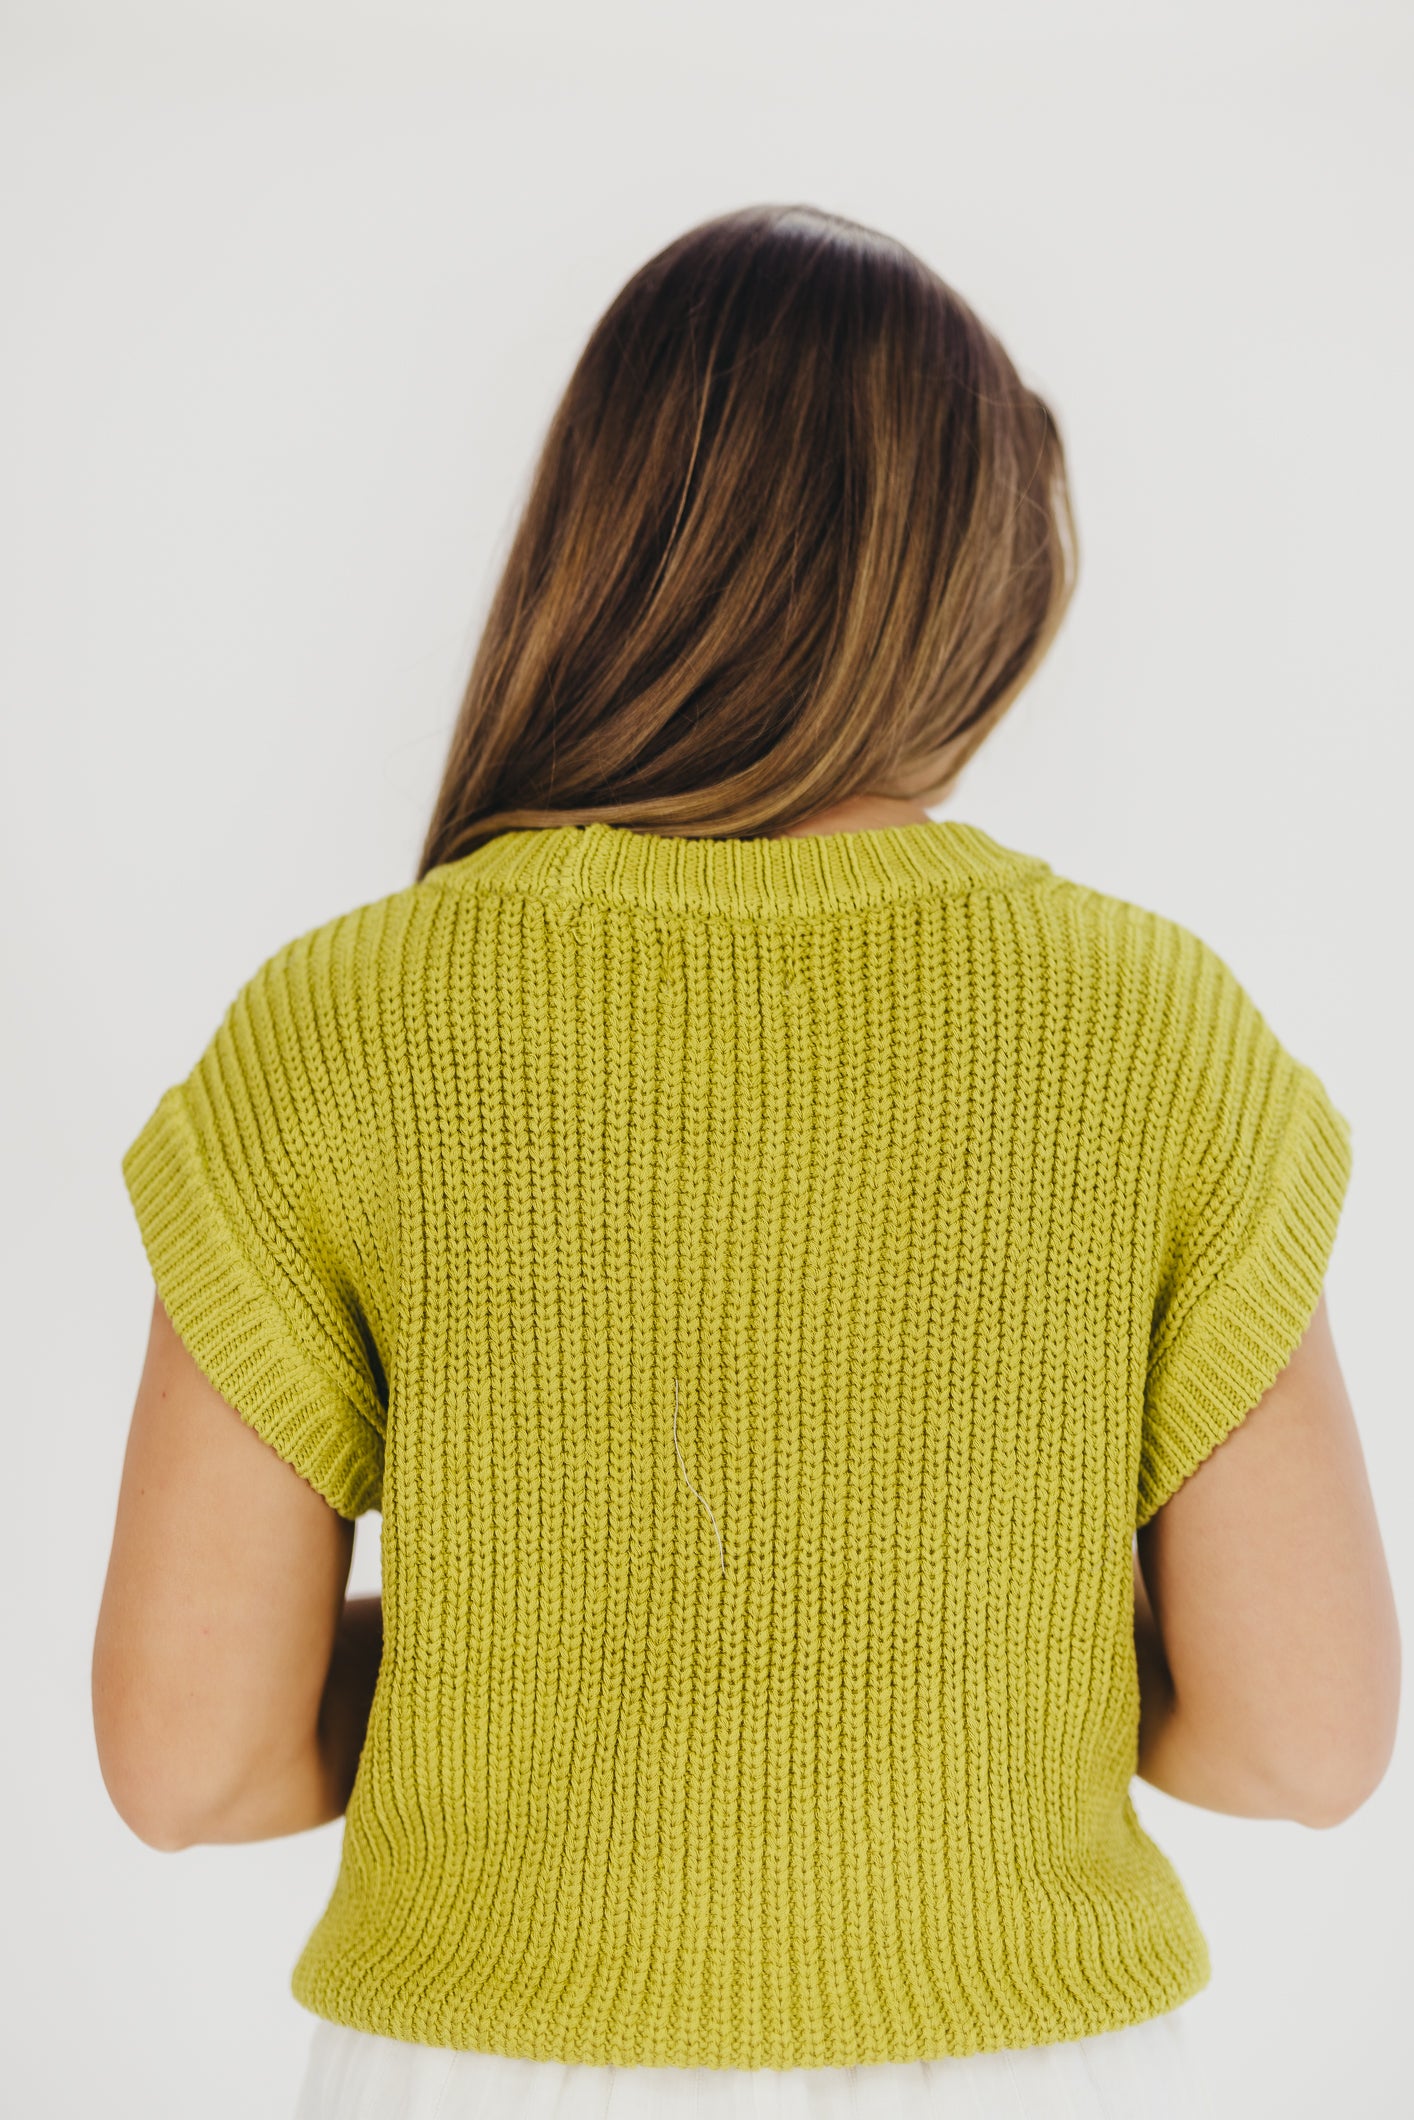 Tiffany Sweater Top in Bright Olive